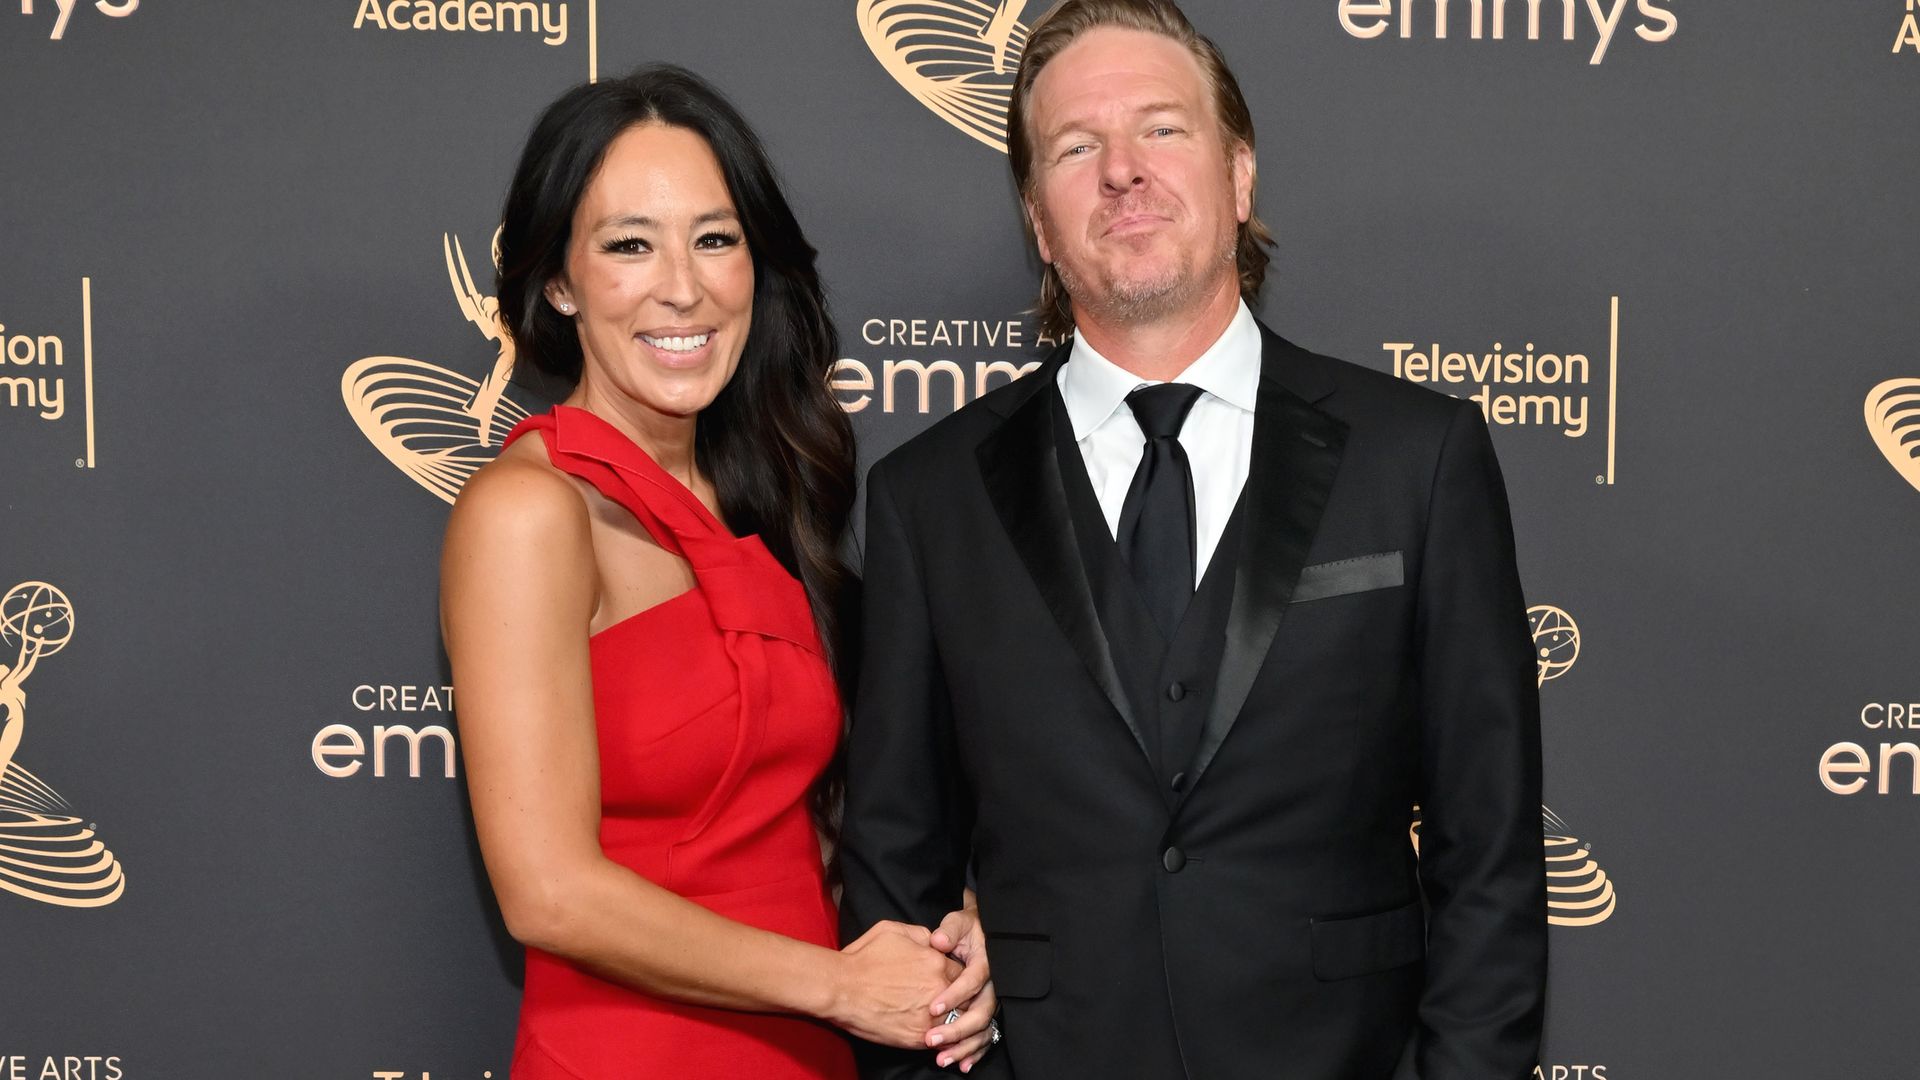 Joanna and Chip Gaines emmys 2022